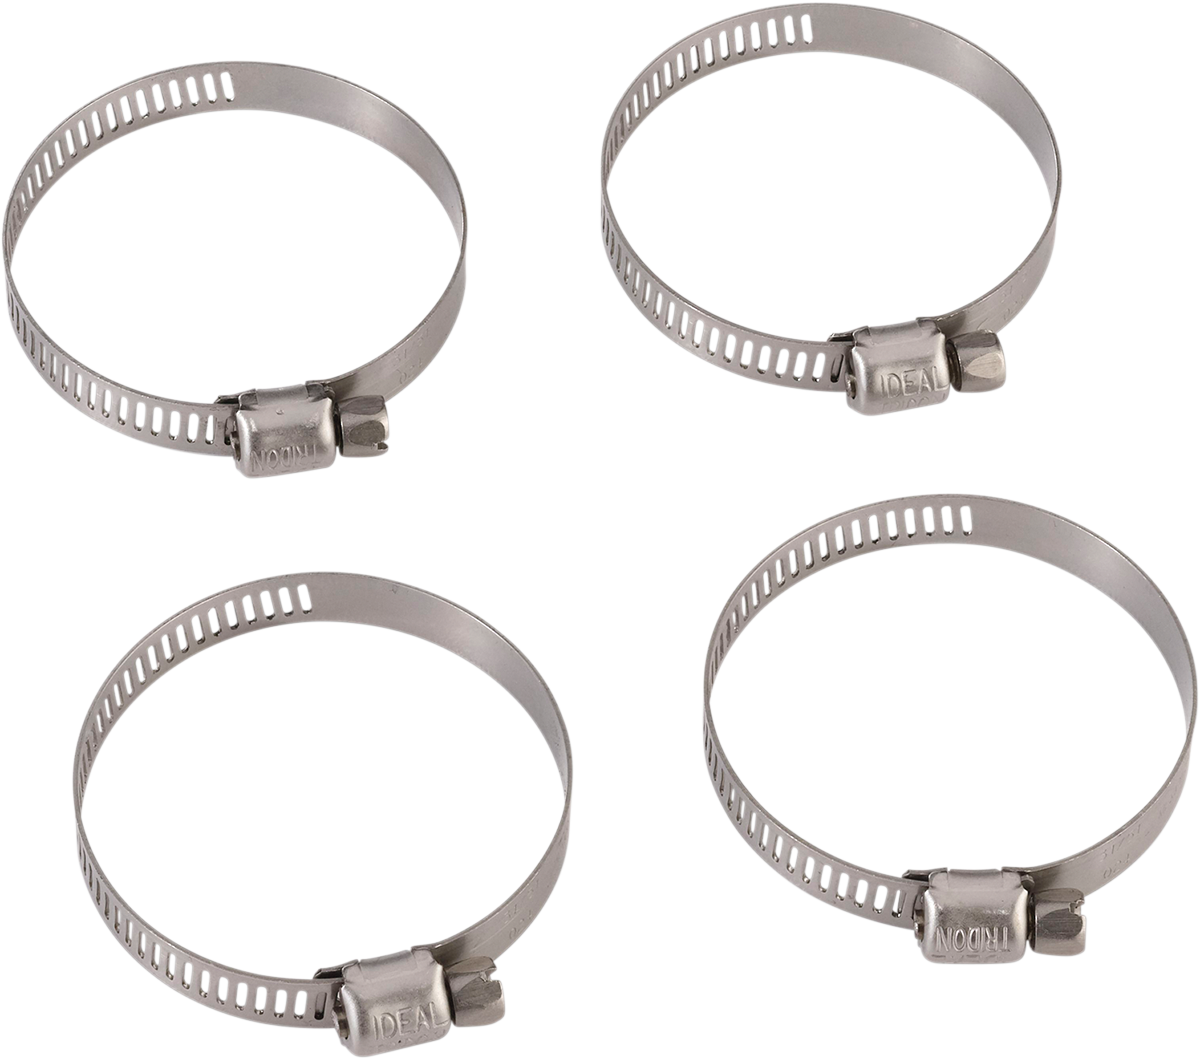 MOOSE RACING HARD-PARTS GEAR DRIVE HOSE CLAMPS CLAMP HOSE SS 26-51MM 4PK